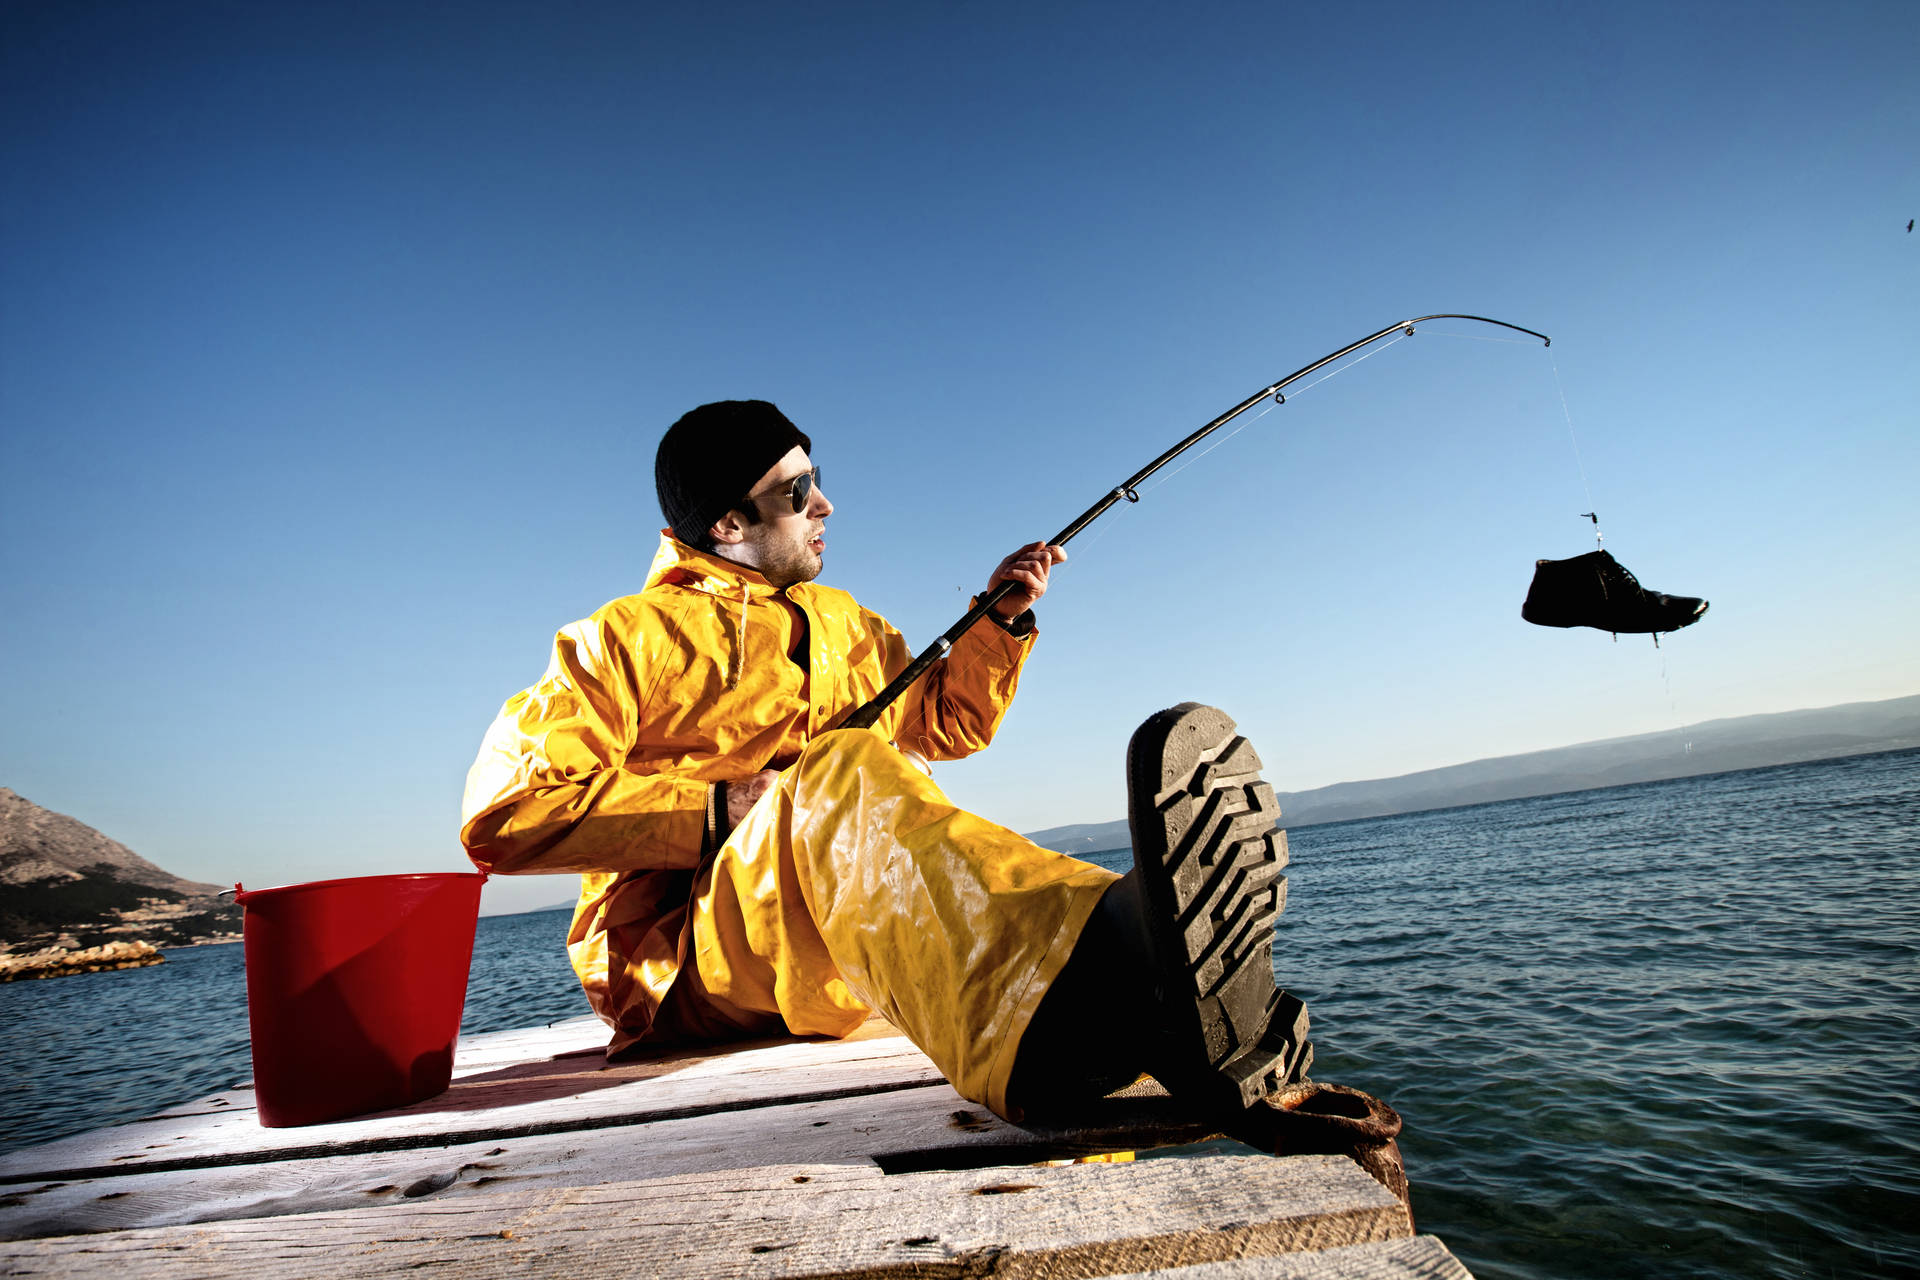 5616X3744 Fishing Wallpaper and Background